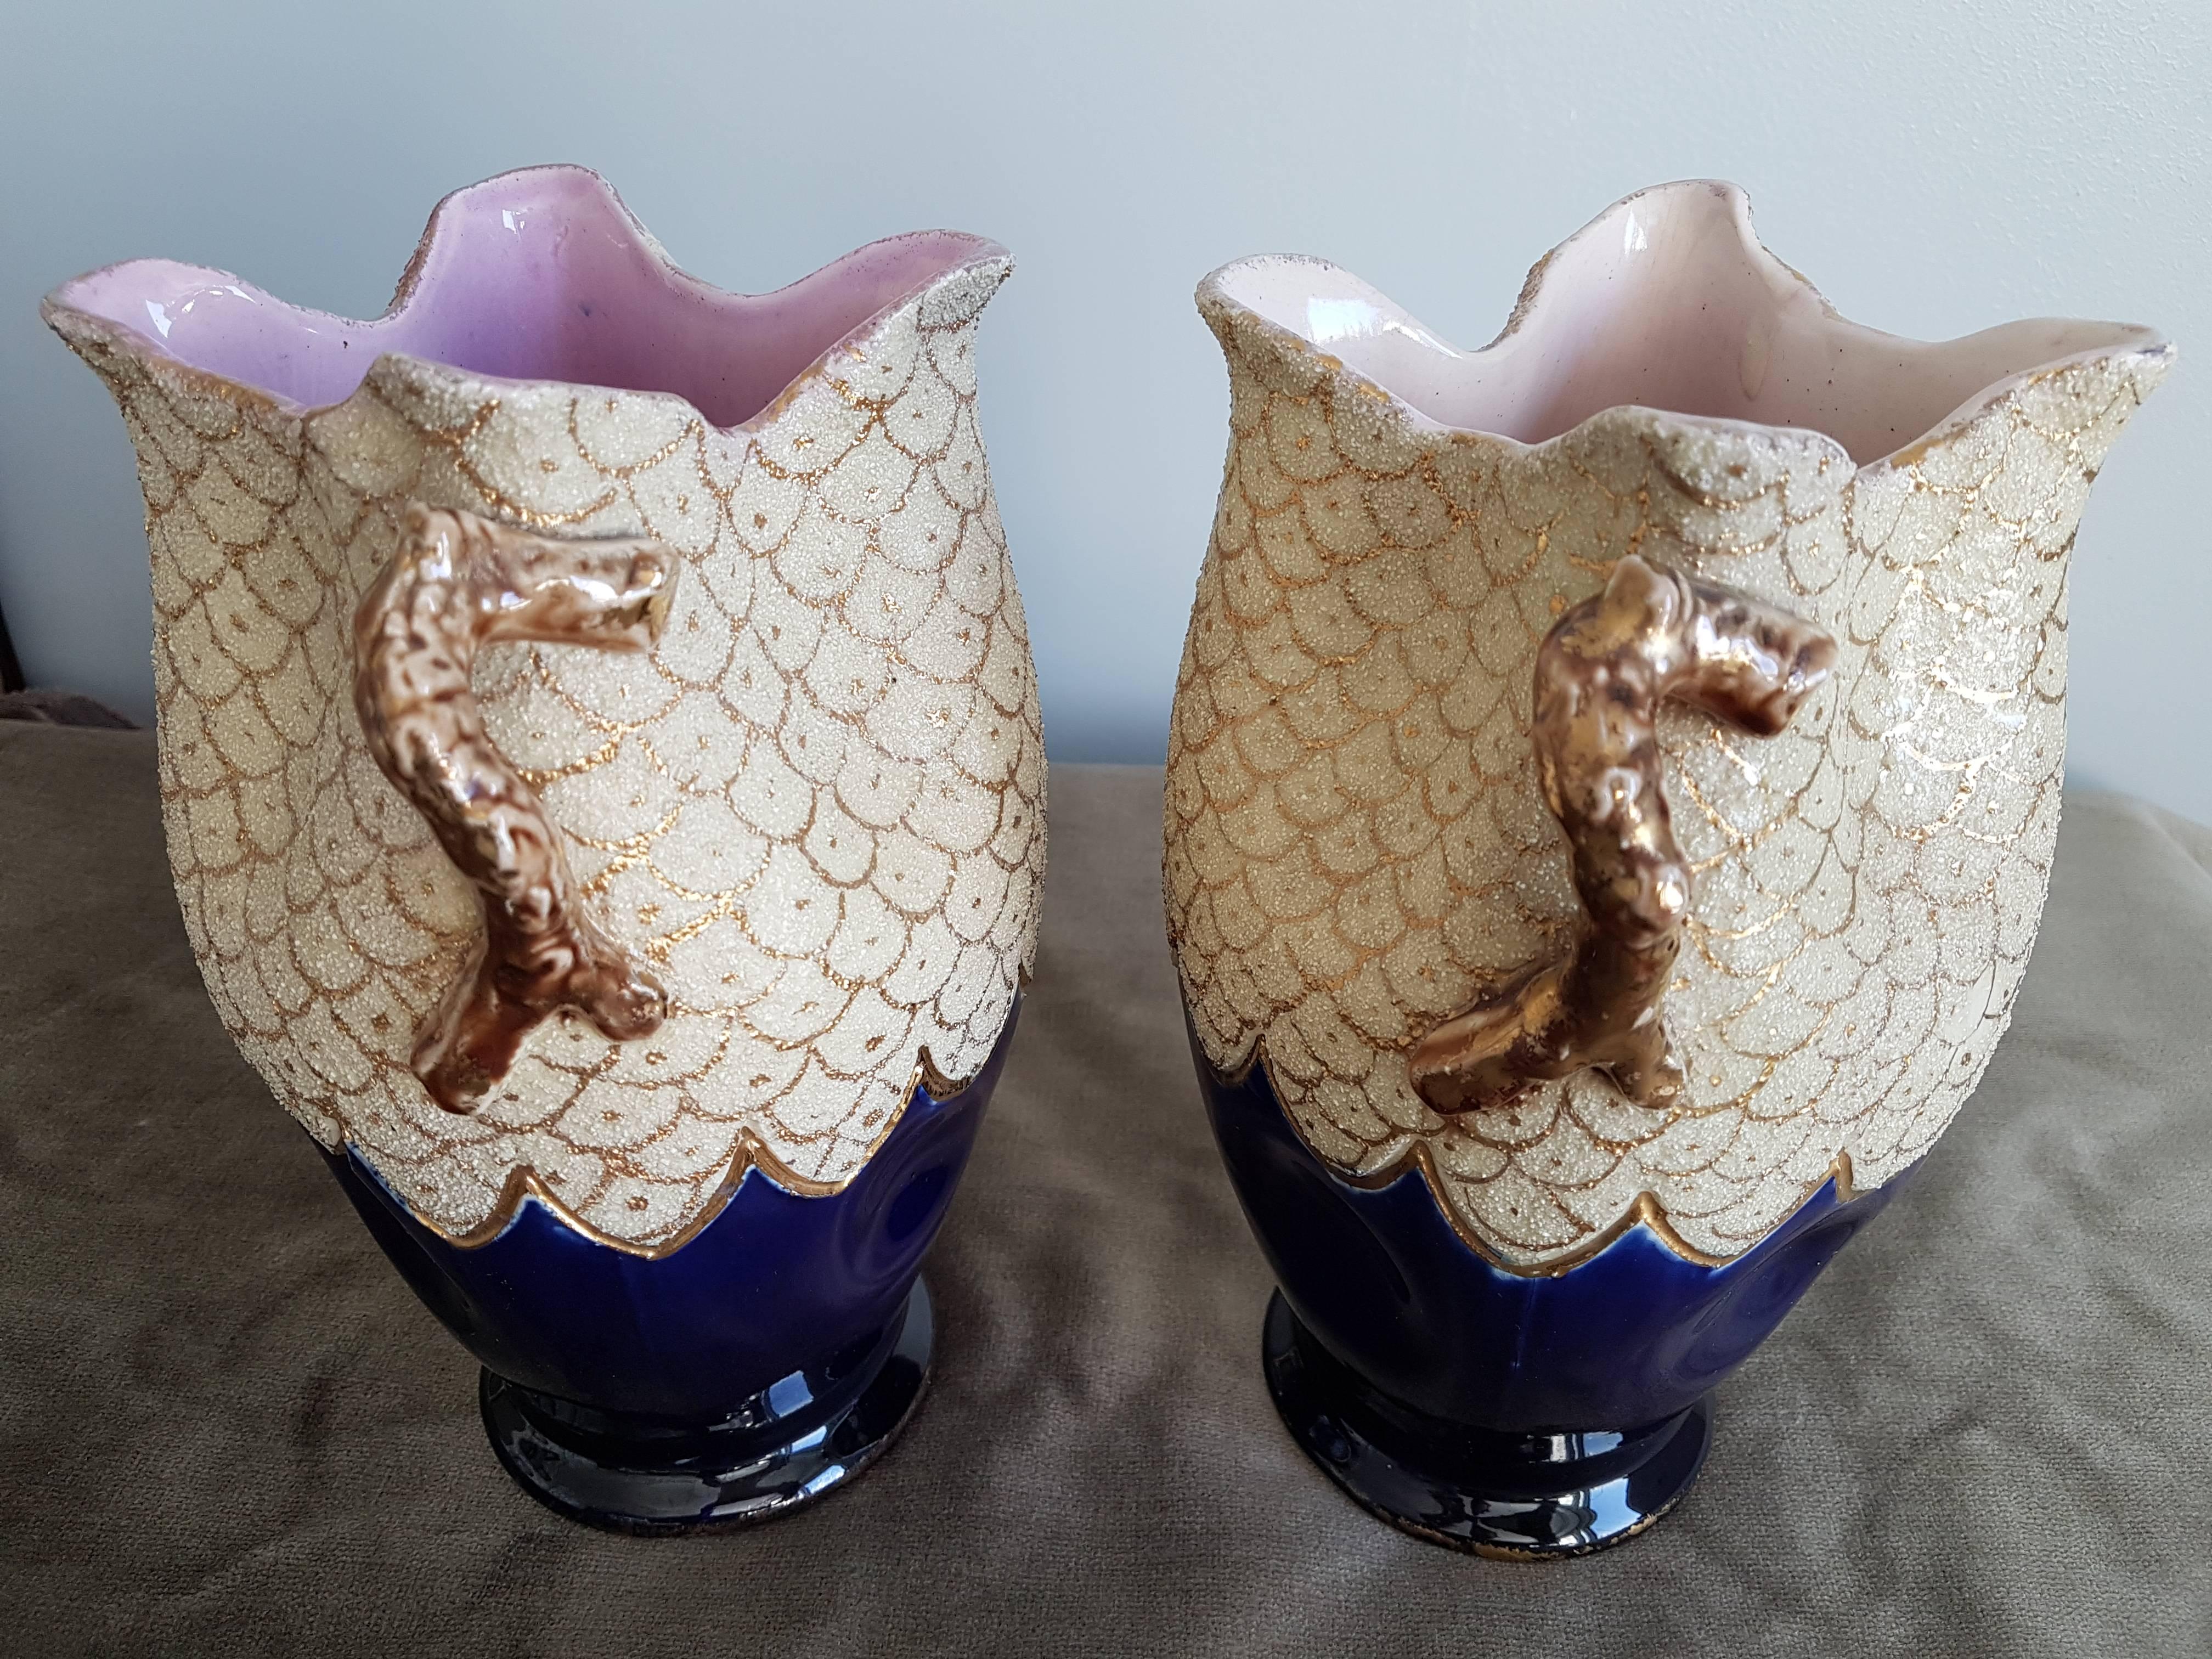 Mid-20th Century Bleu de Sèvres and Gold Pair of Vases, Mid-Century Modern, France, 1950